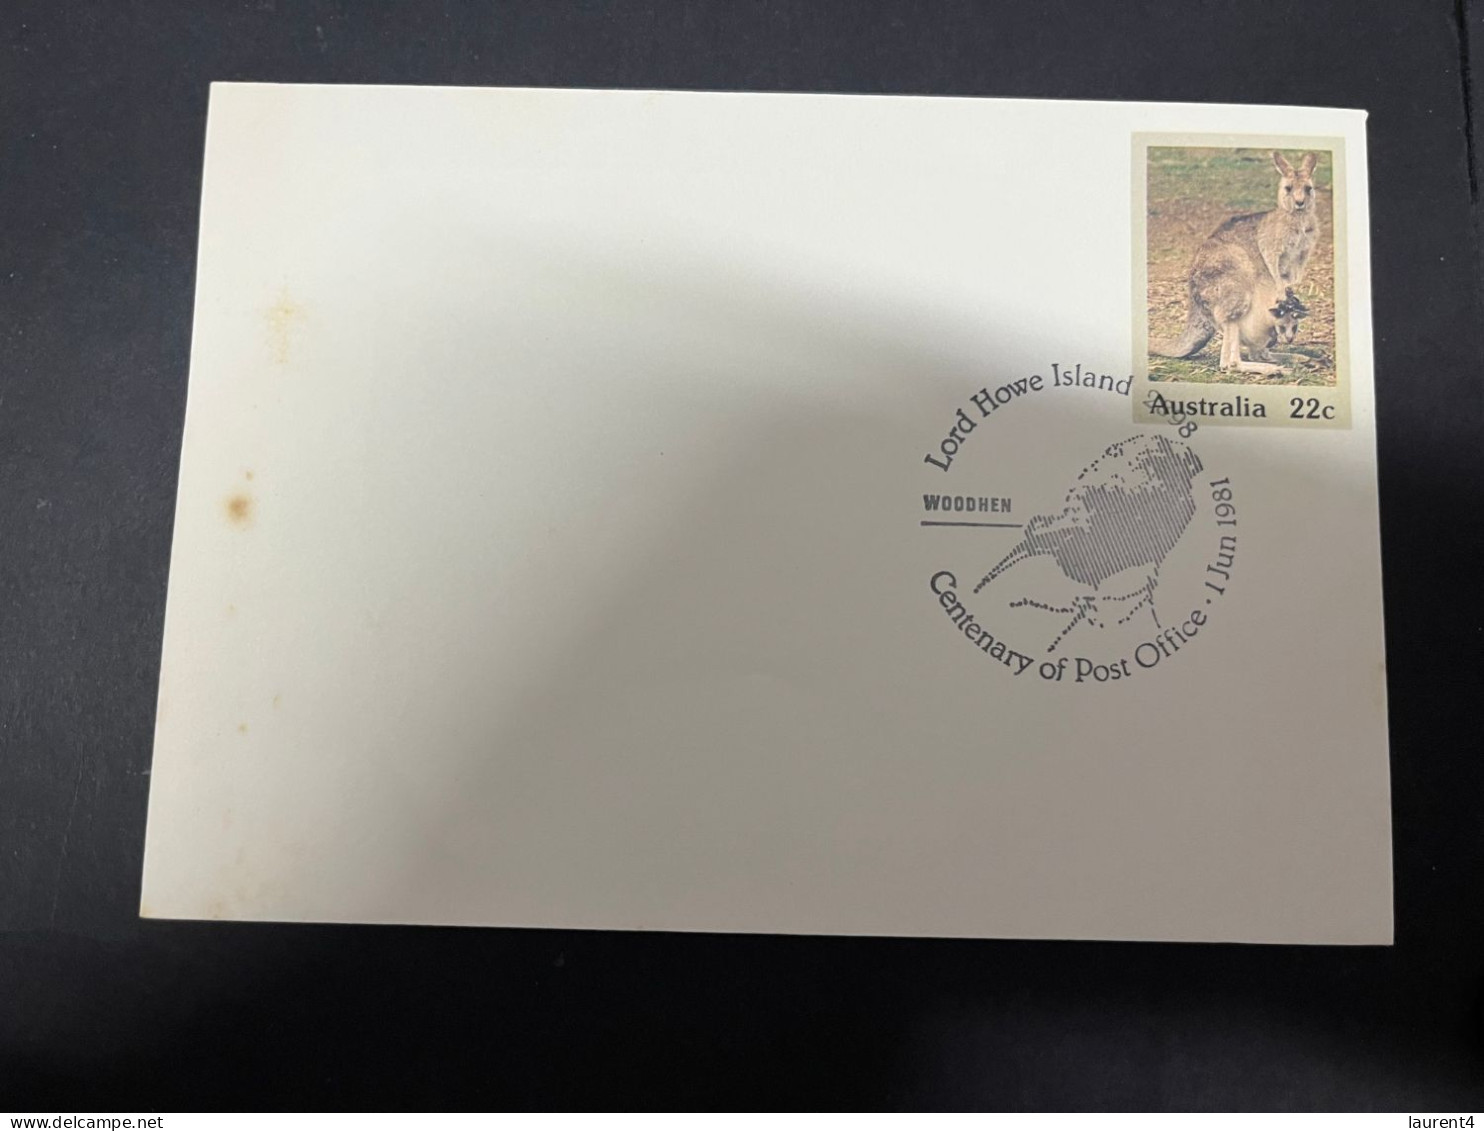 21-5-2024 (5 Z 44) Australia FDC - 1 Cover - Lord Howe Island (1981 Woodhen Special P/m) Kangaroo (w. Spot) - Primo Giorno D'emissione (FDC)